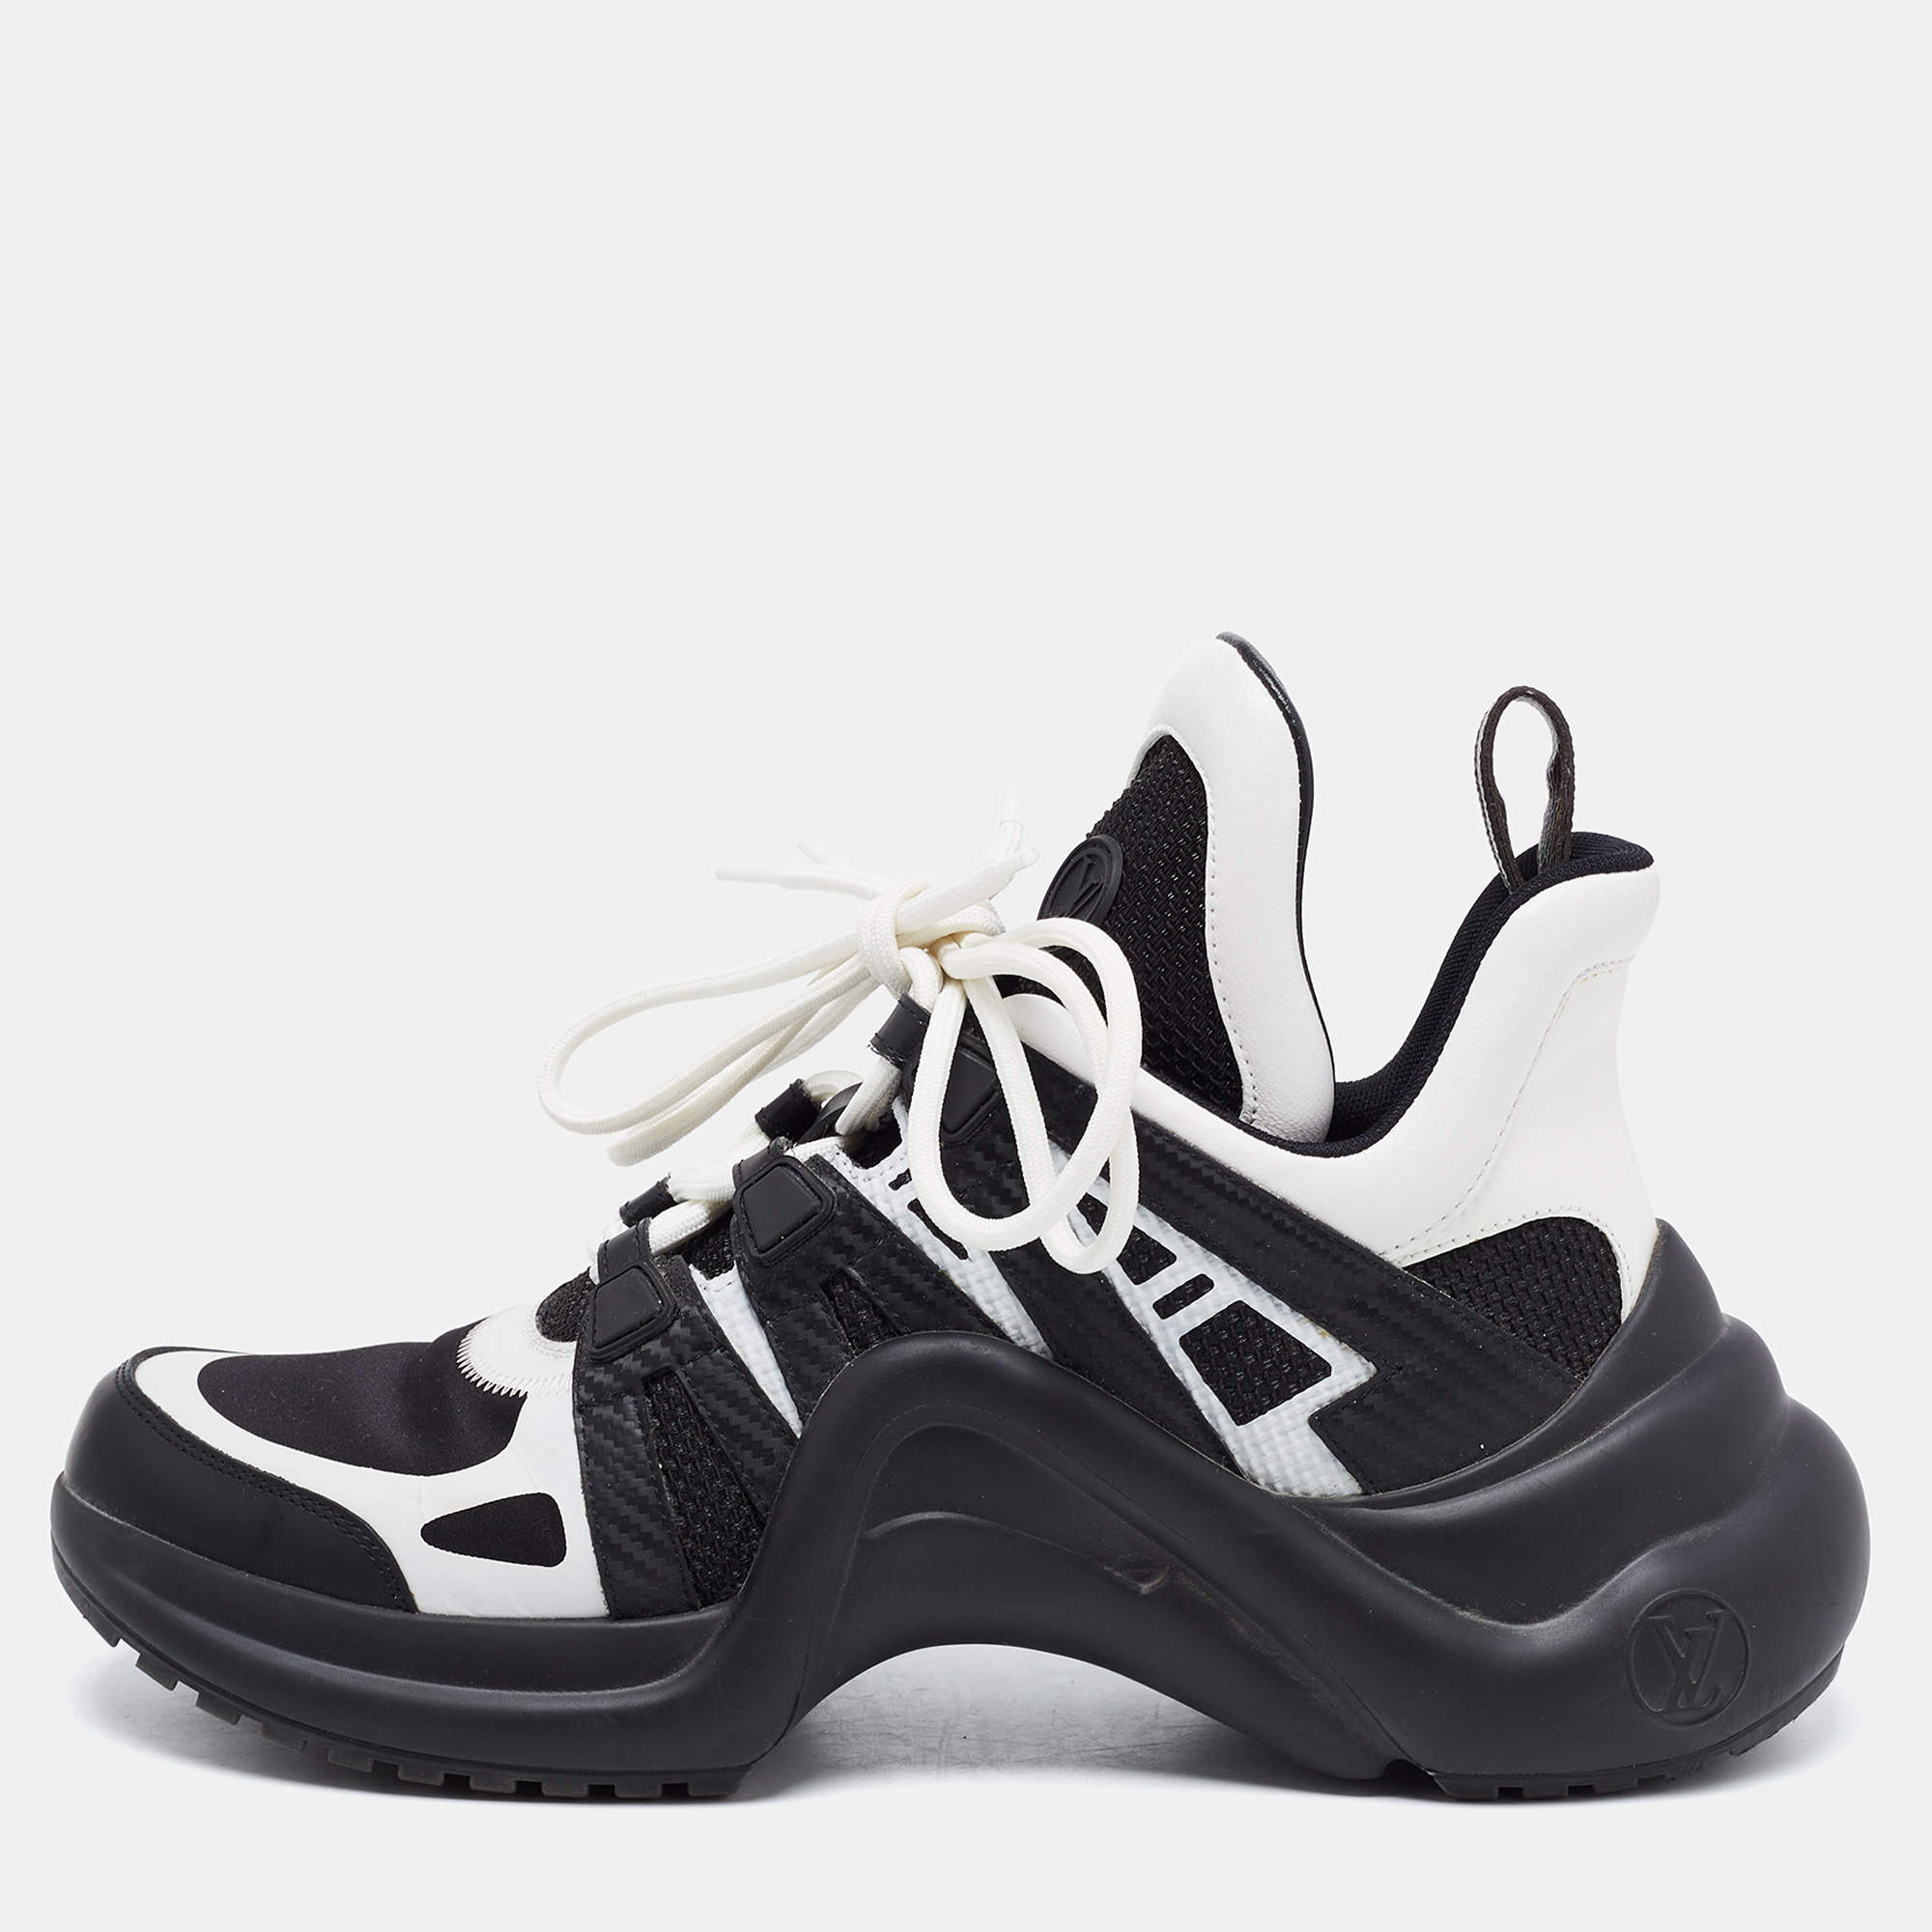 Louis Vuitton Archlight Leather and Mesh Sneakers